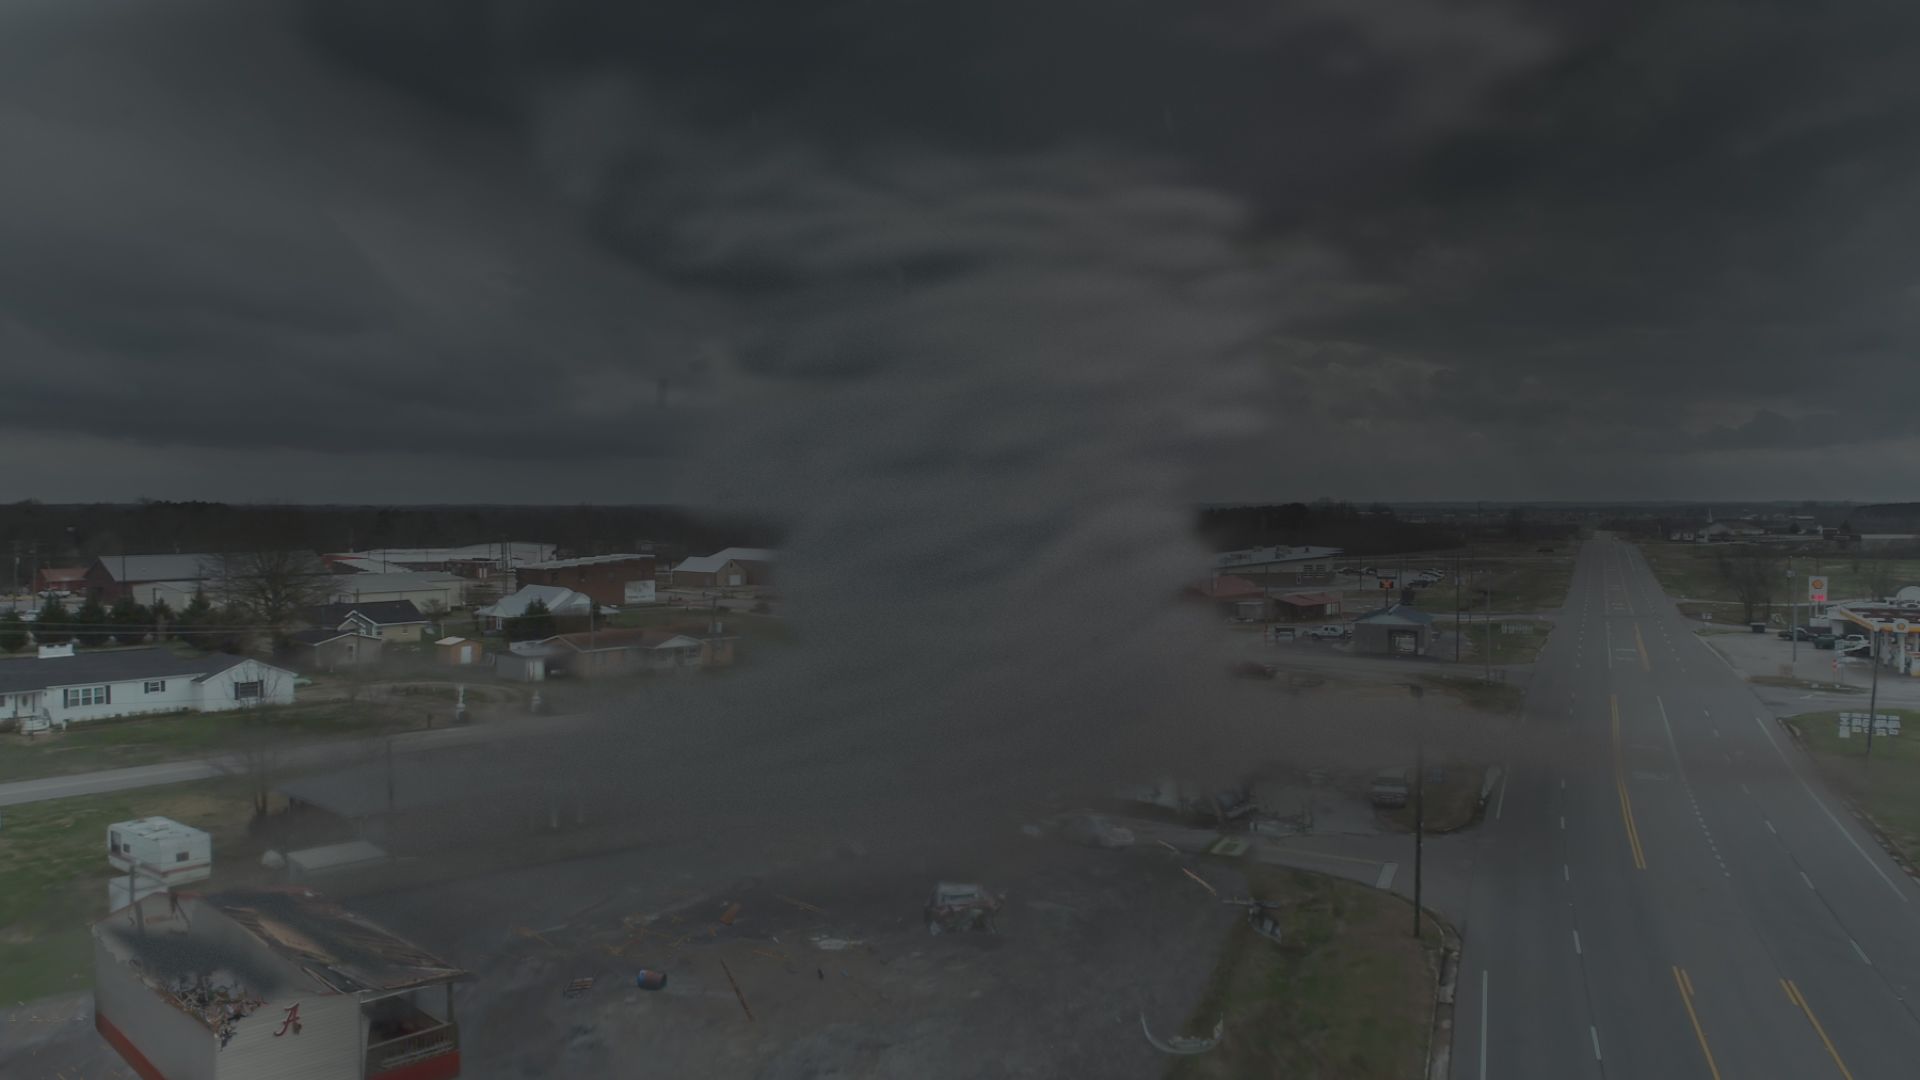 Tornado ripping through town. This is from WITNESS TO DISASTER [Photo of the day - February 2022]